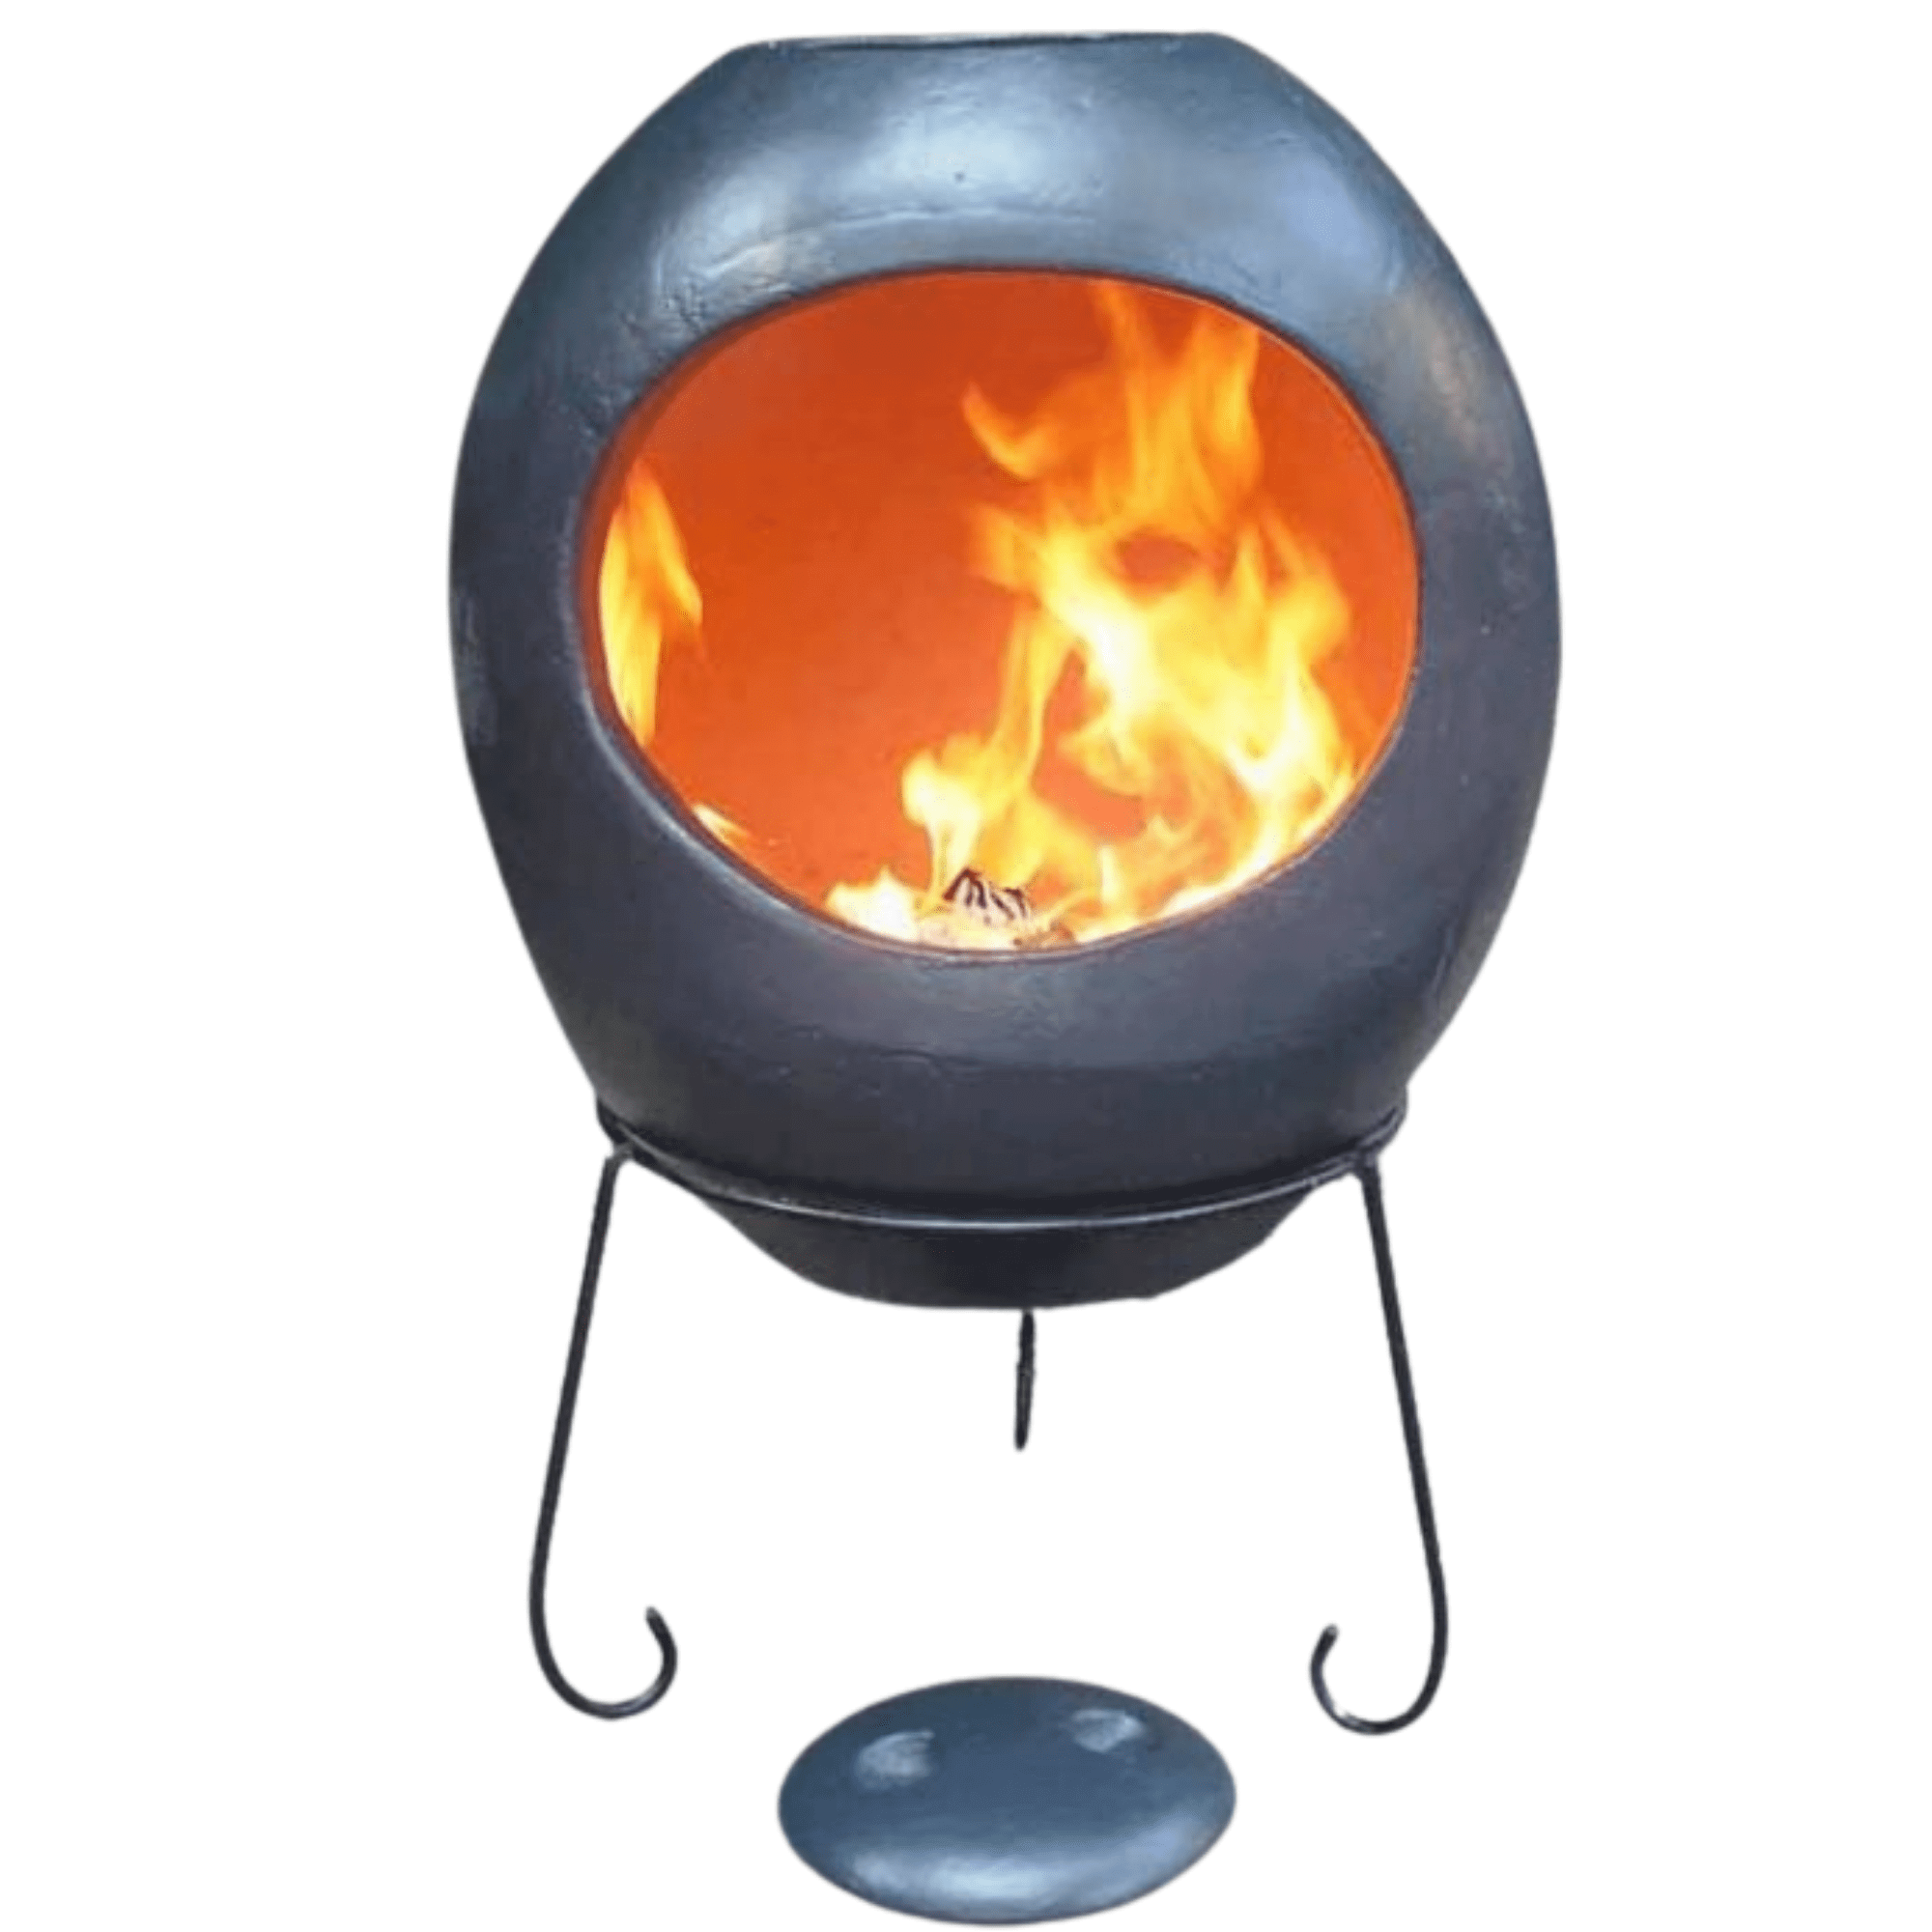 Perfect Patio Ellipse XL Mexican Chimenea with Glazed Effect in Charcoal Grey